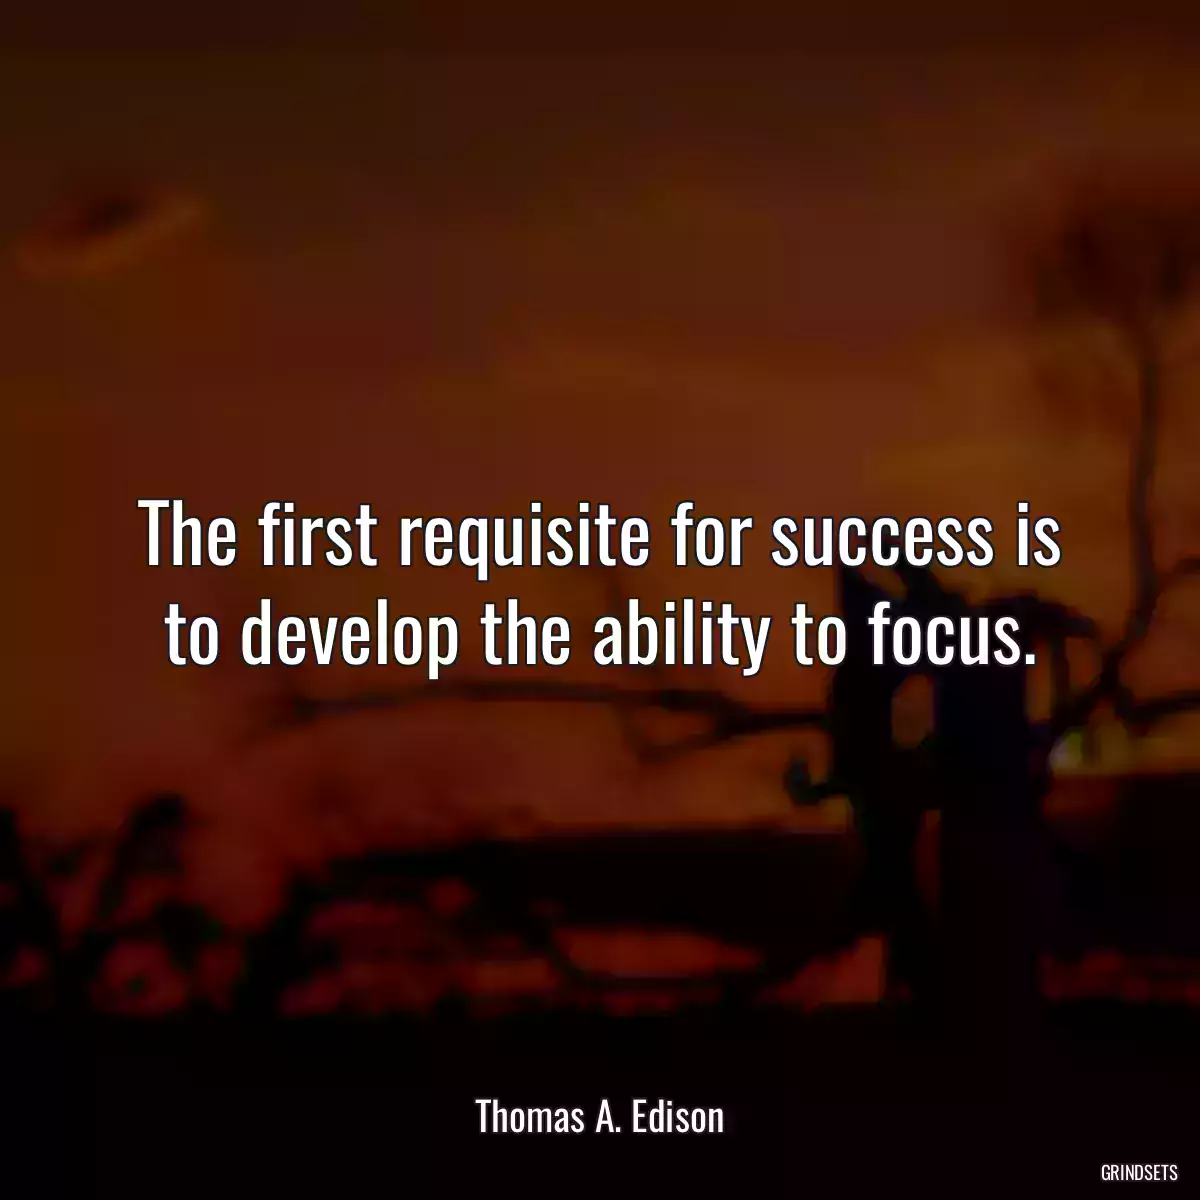 The first requisite for success is to develop the ability to focus.